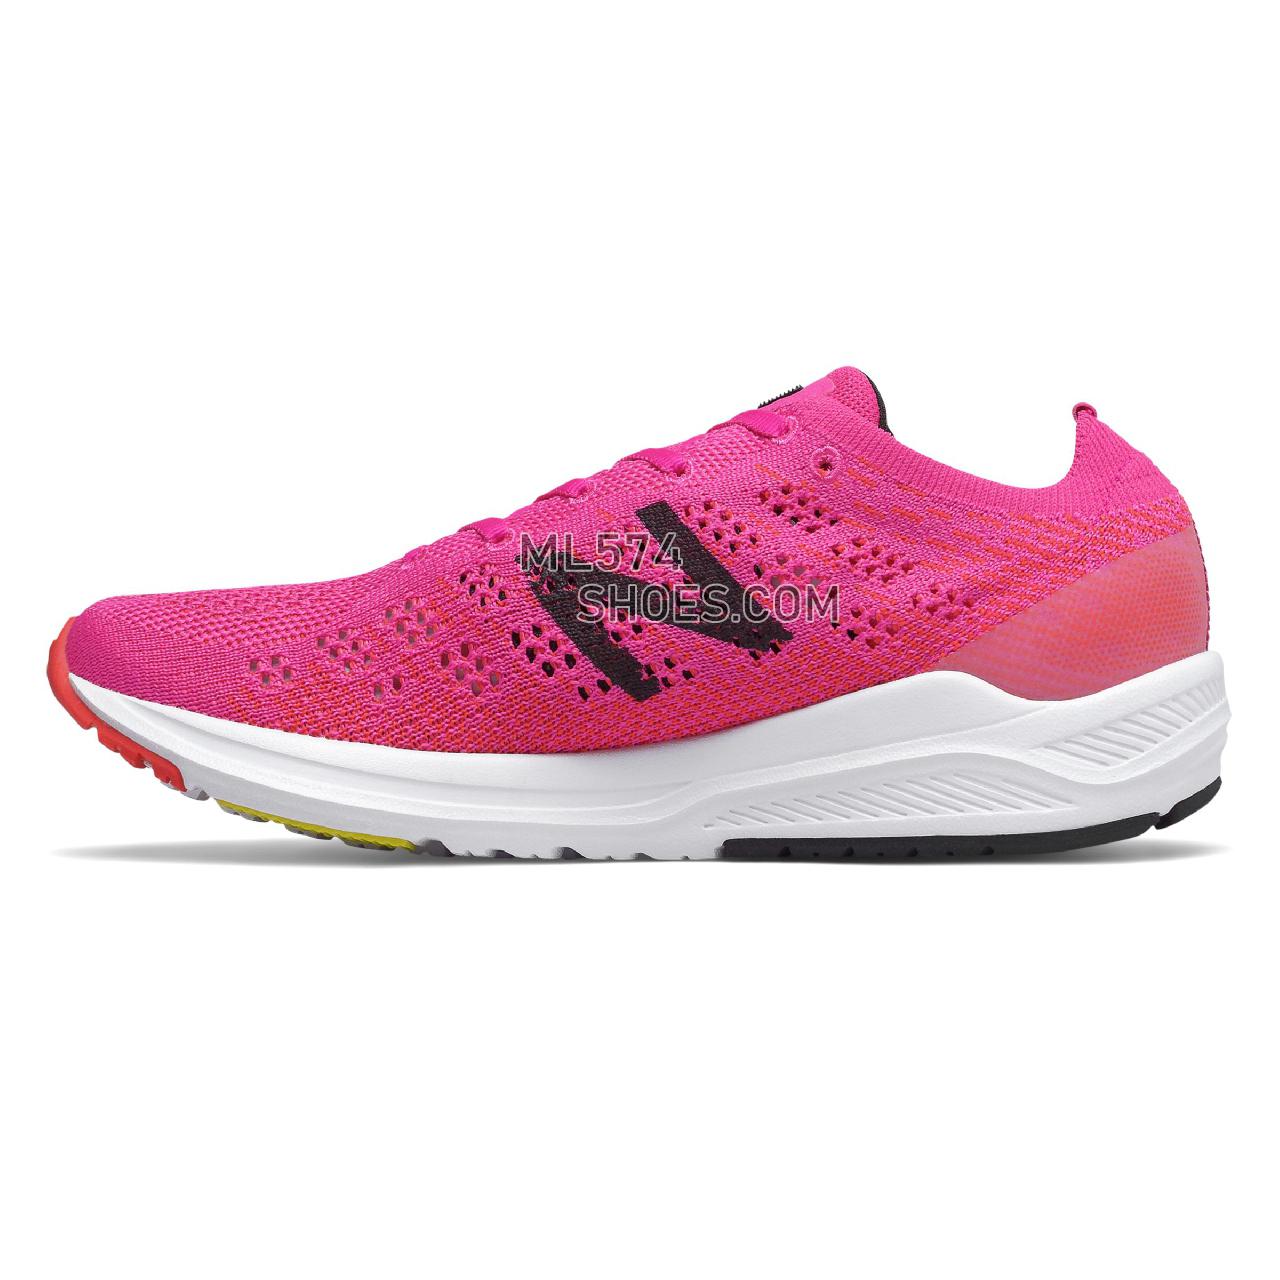 New Balance 890v7 - Women's Neutral Running - Peony with Energy Red - W890PO7